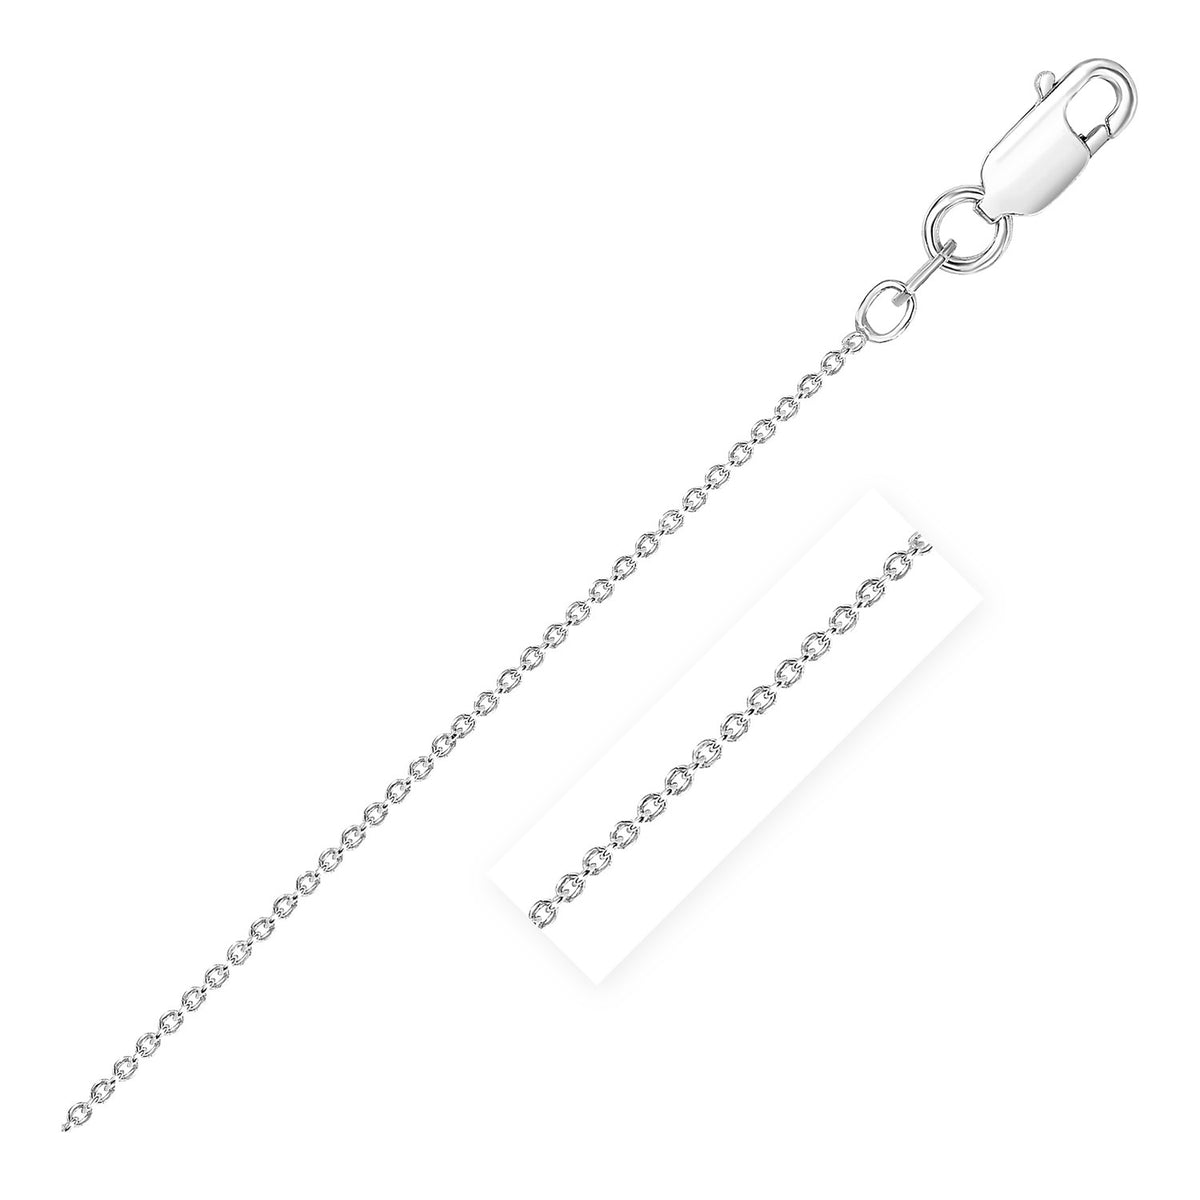 Cable Chain - Sterling Silver 1.80mm